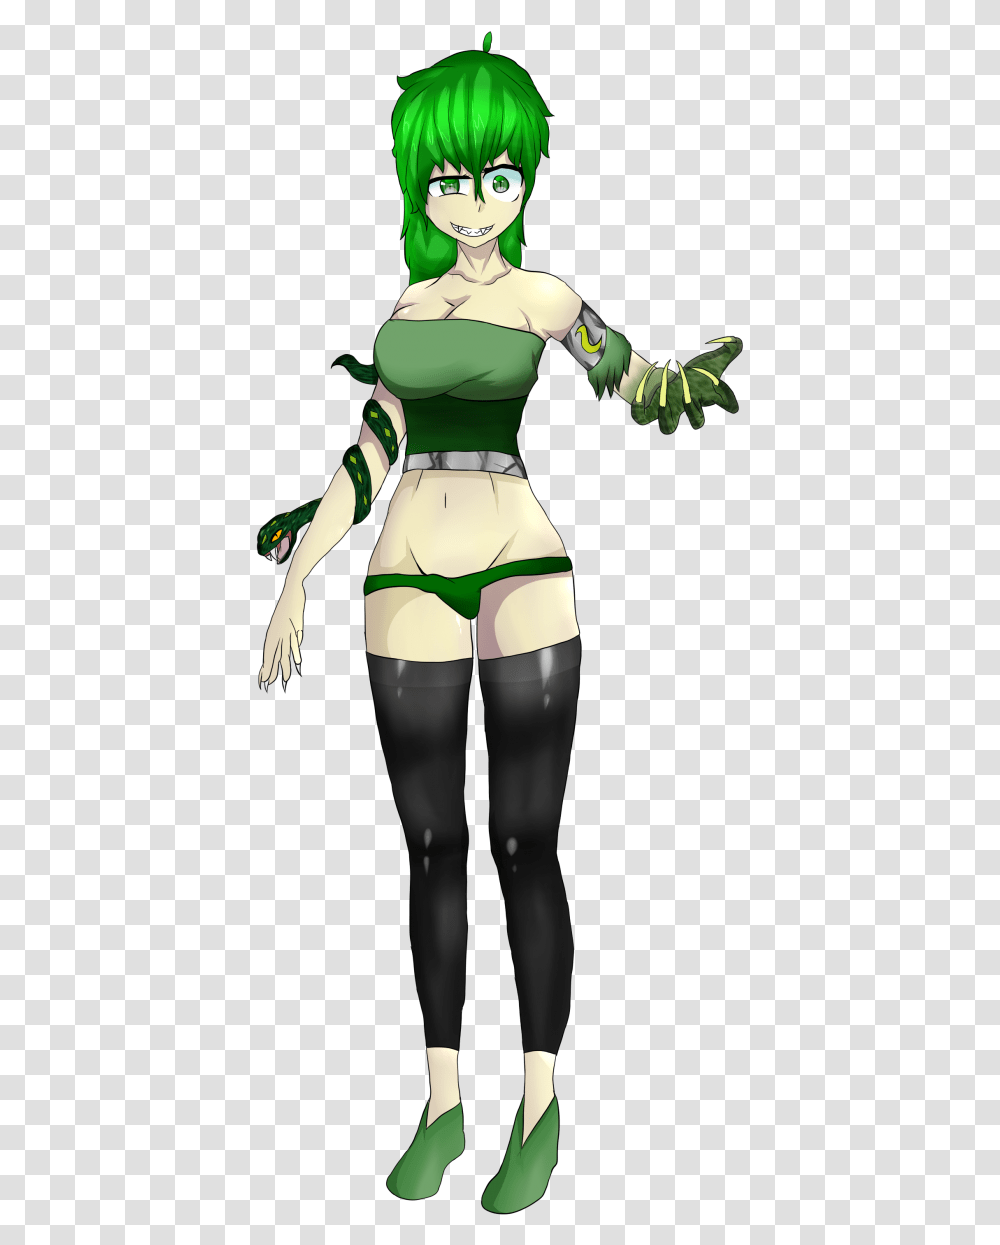 The Yig Waifu But Different Cartoon, Apparel, Lingerie, Underwear Transparent Png